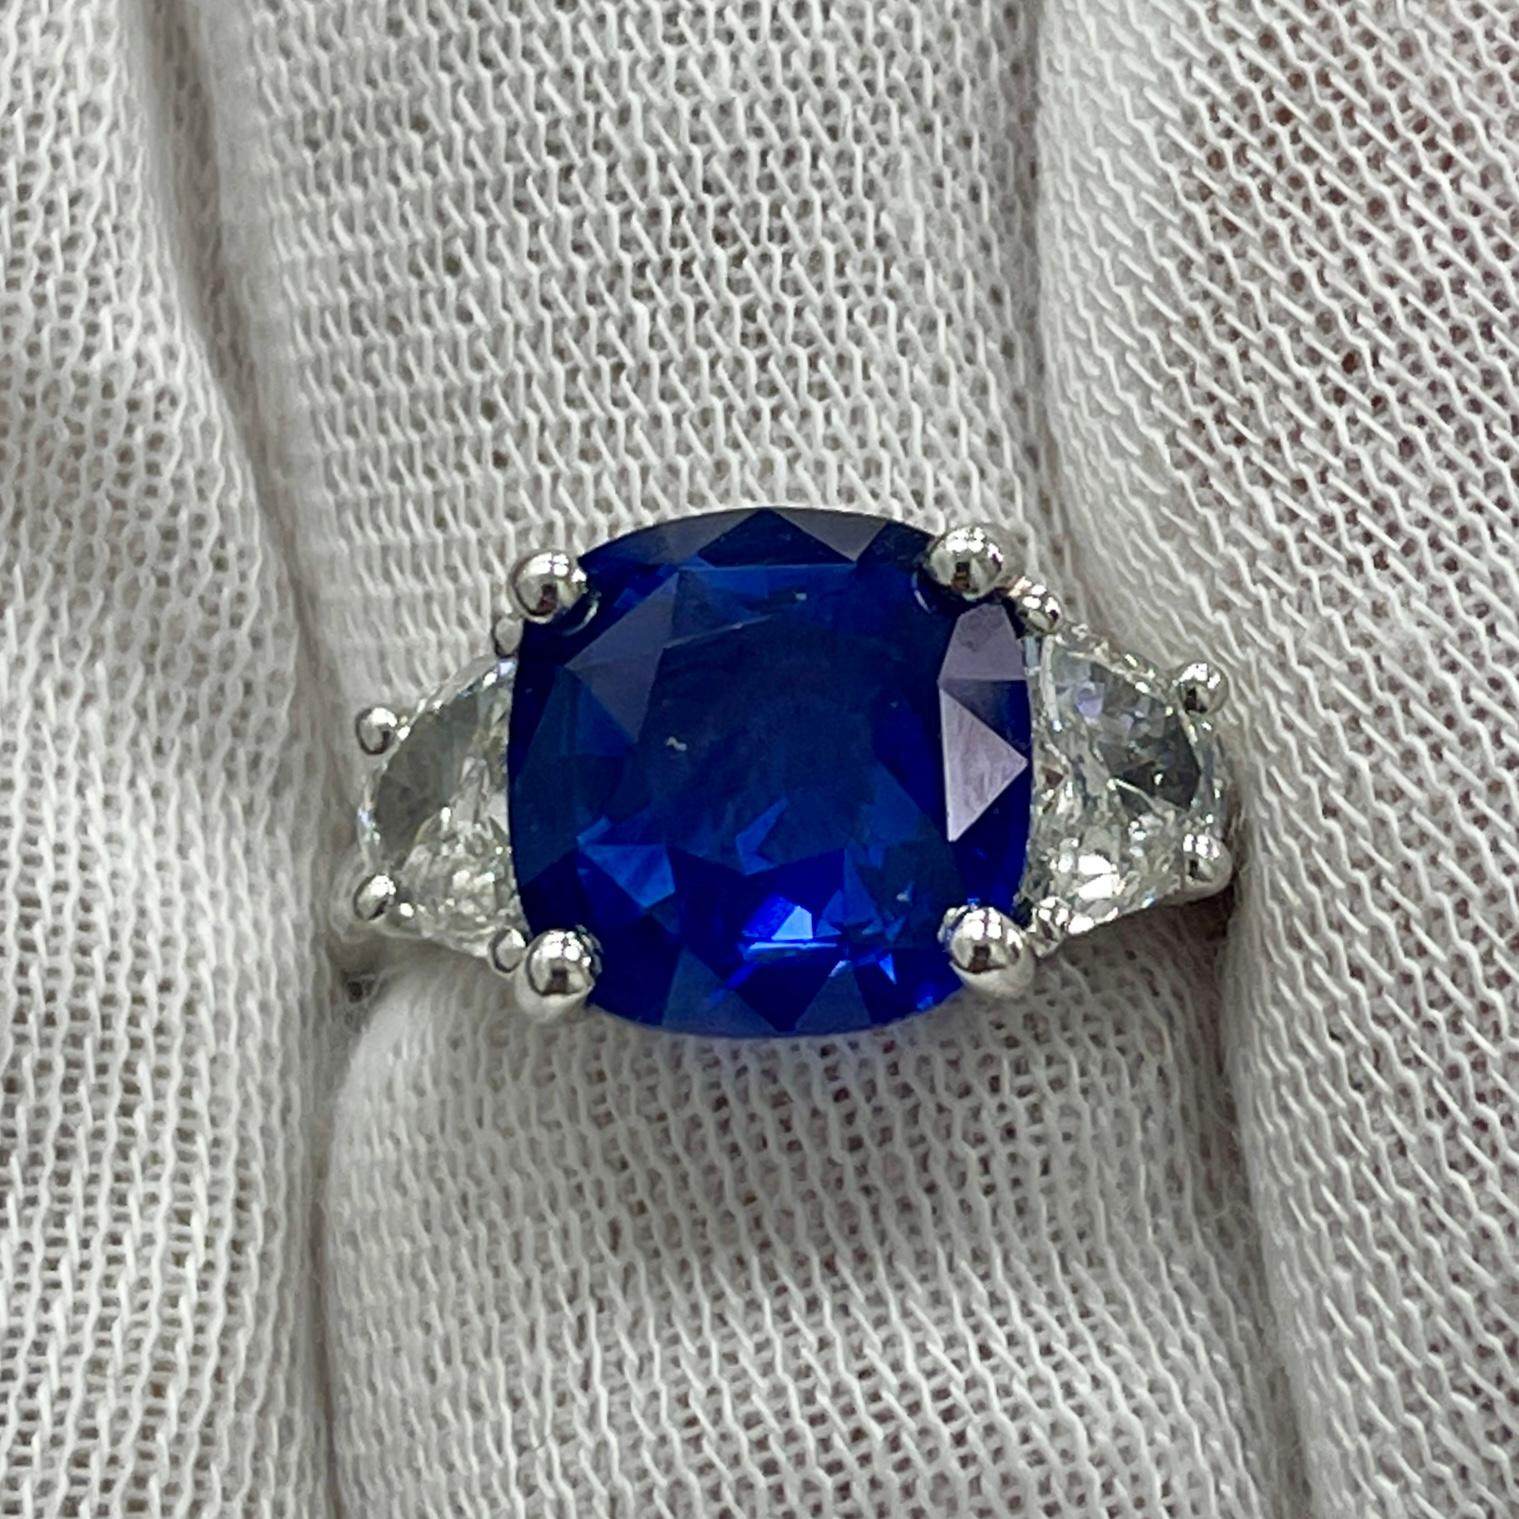 This is a LIVELY blue sapphire, mounted in an elegant 18K white gold and diamond ring with 0.61Ct of brilliant white diamonds. Suitable for any occasion!